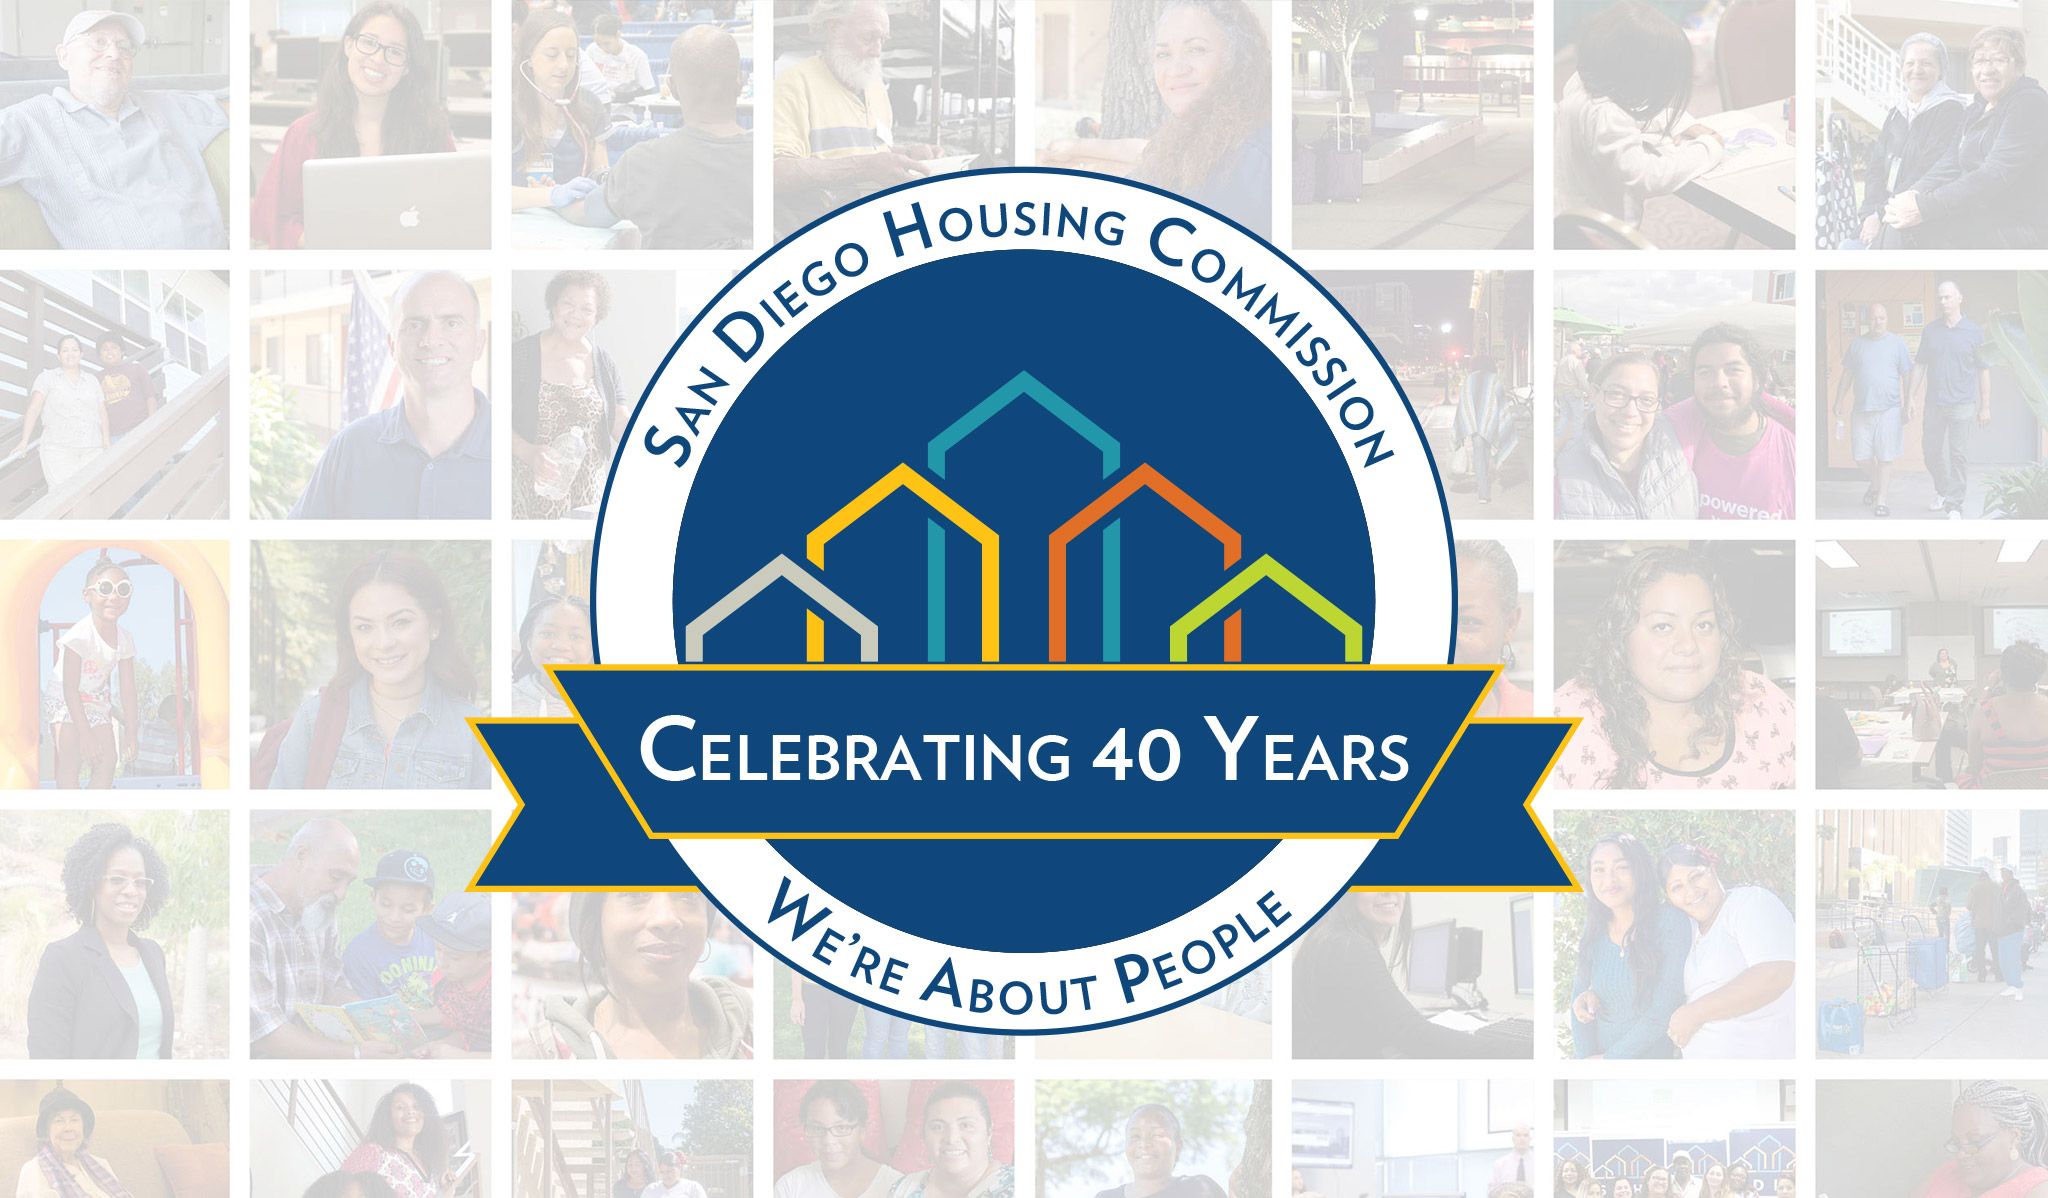 San Diego Housing Commission Launches Special Website Section to